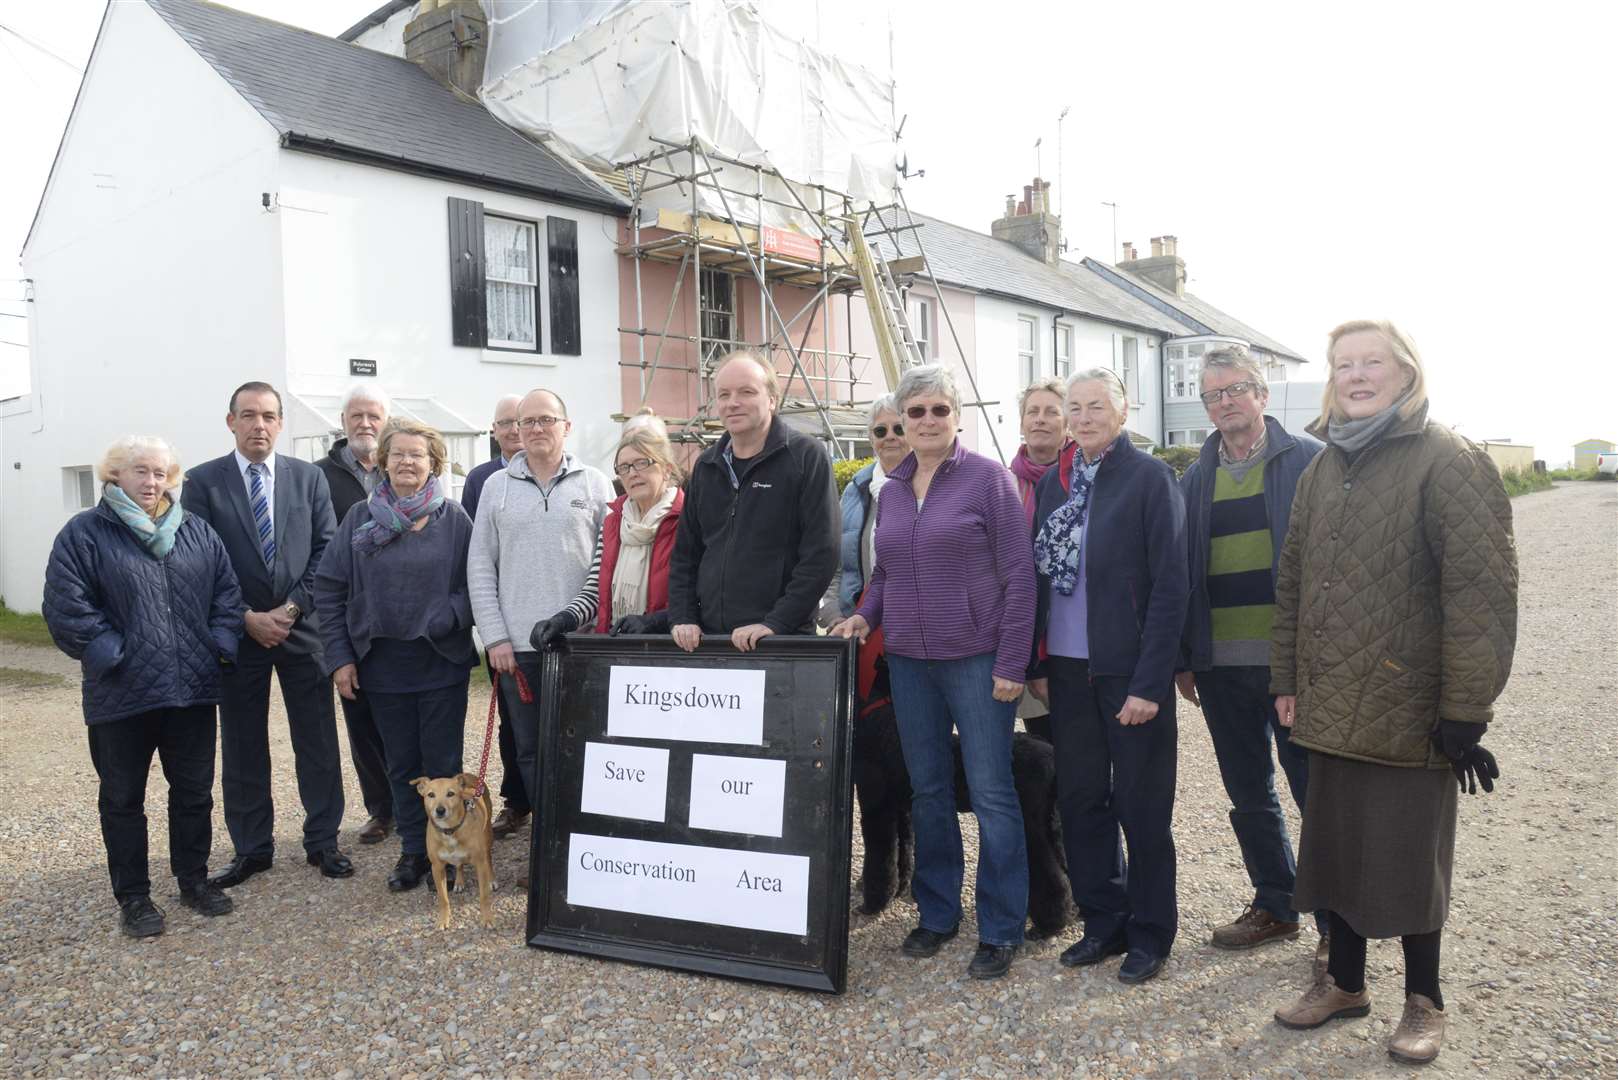 Campaigners opposed to alterations to the conservation area in North Road, Kingsdown.